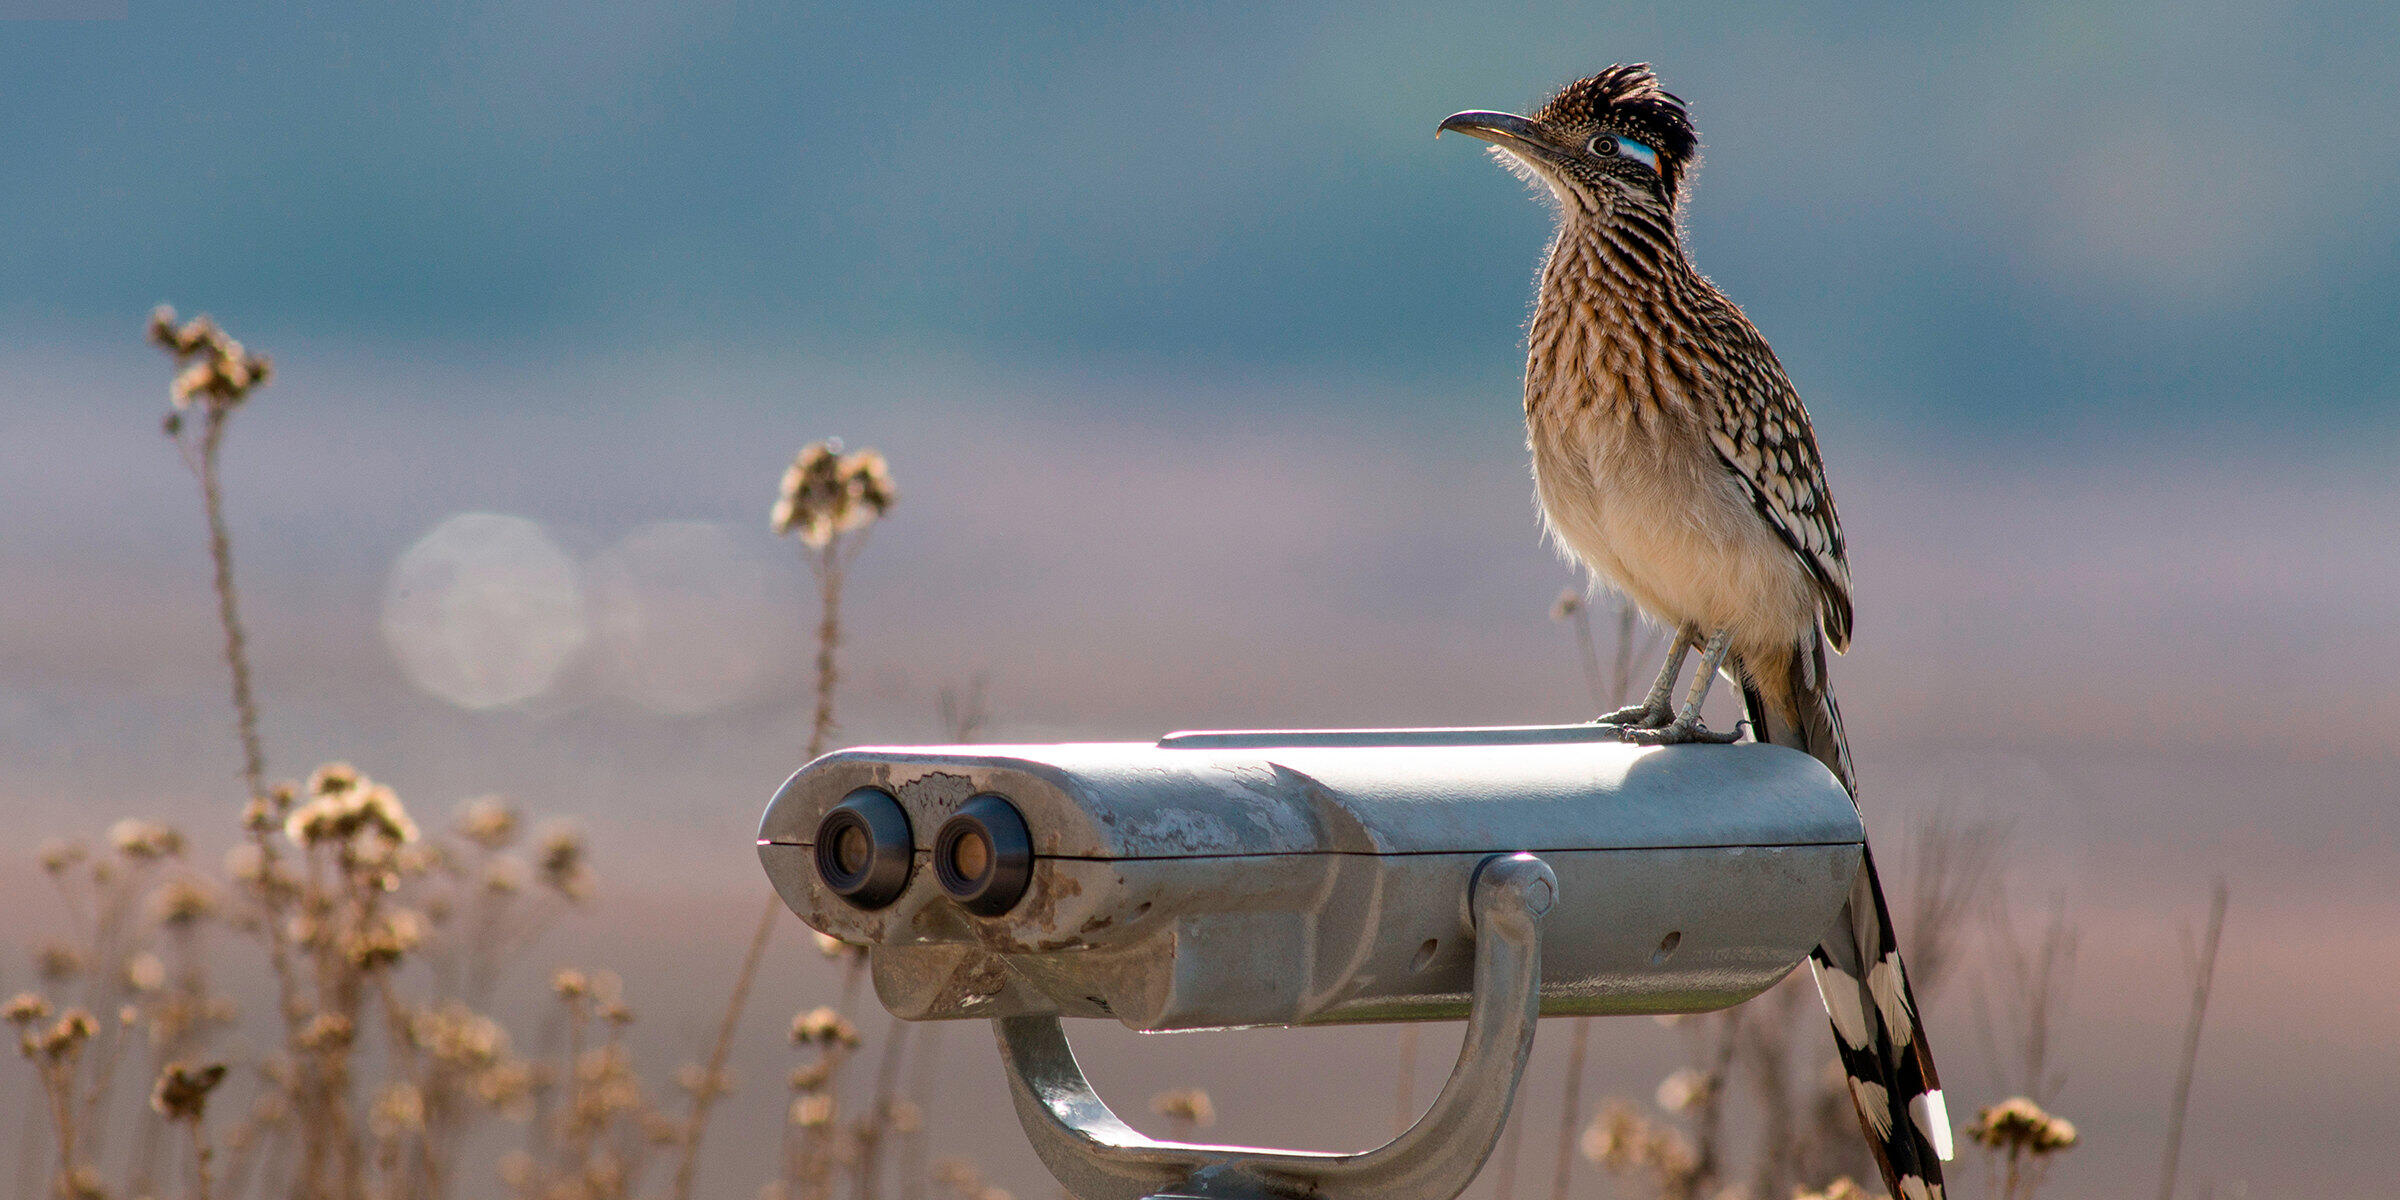 A greater roadrunner stands on top of a tower viewer.